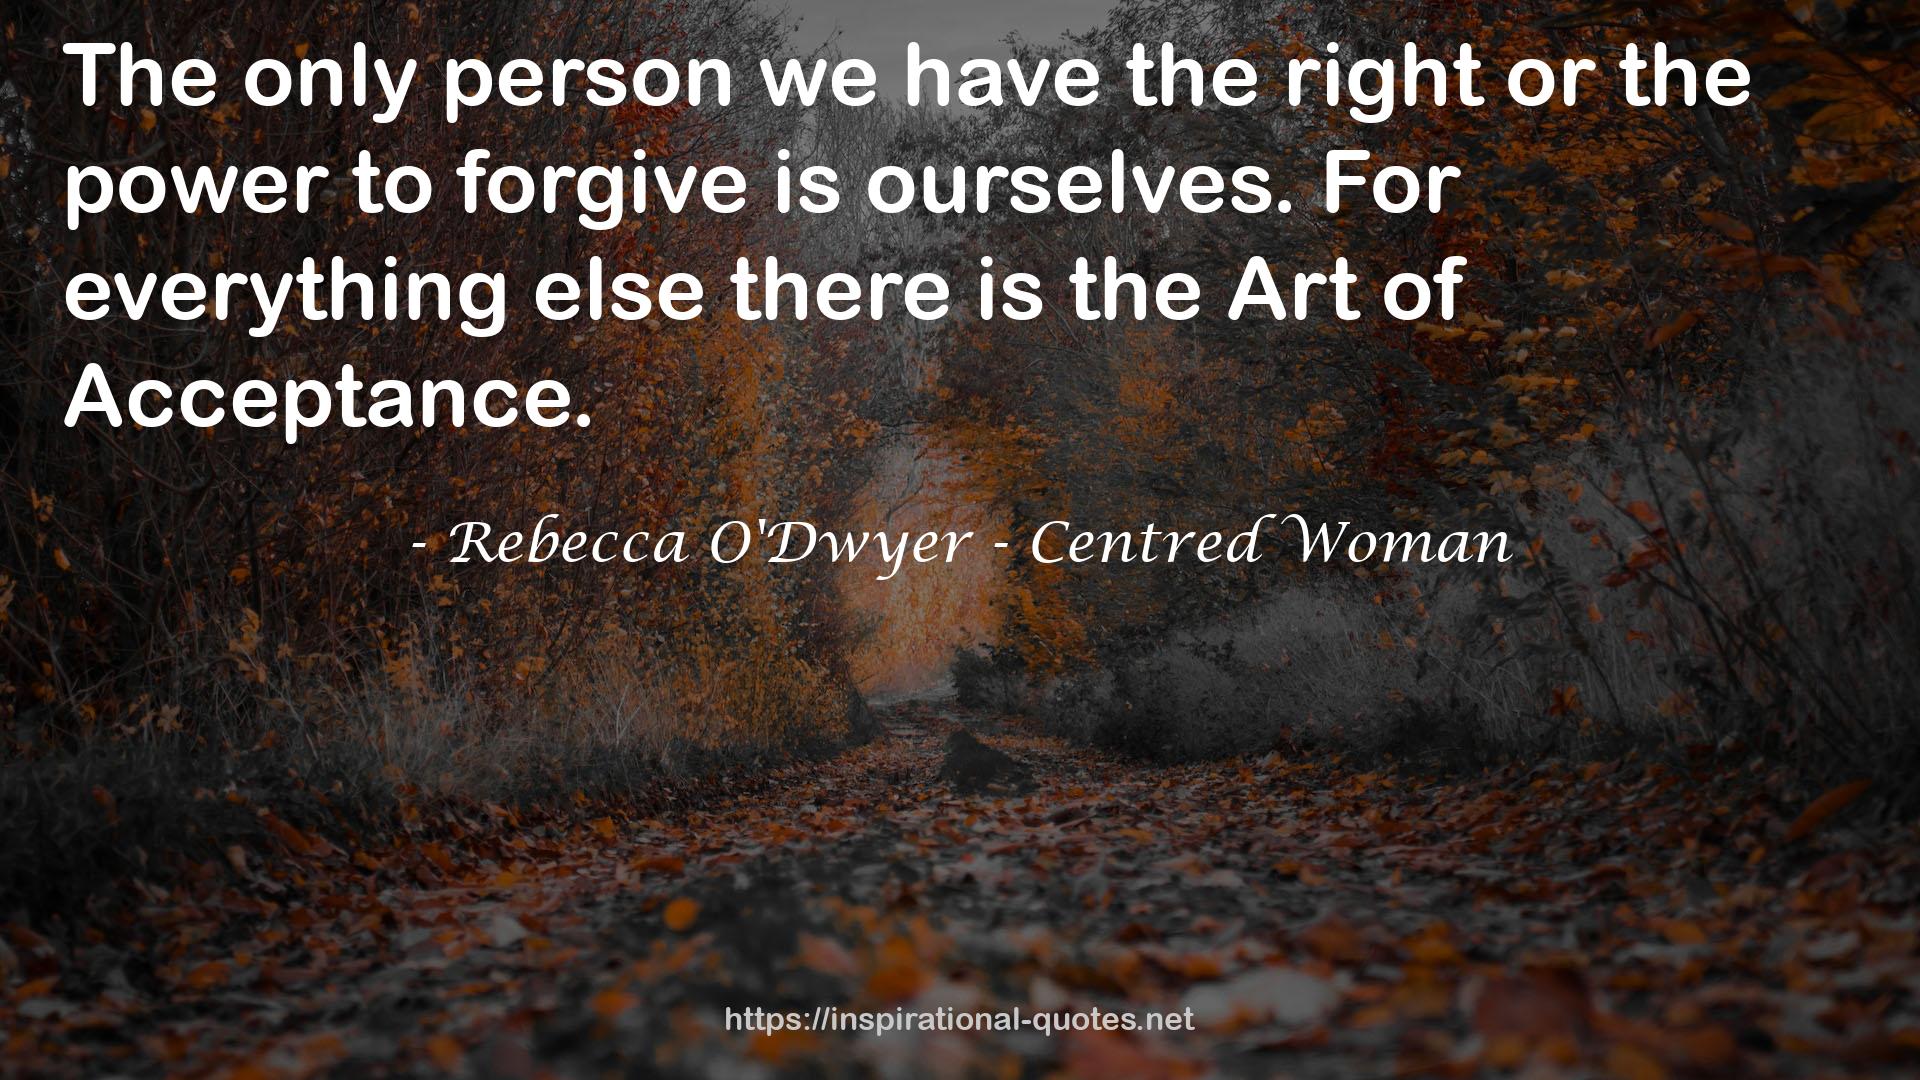 Rebecca O'Dwyer - Centred Woman QUOTES